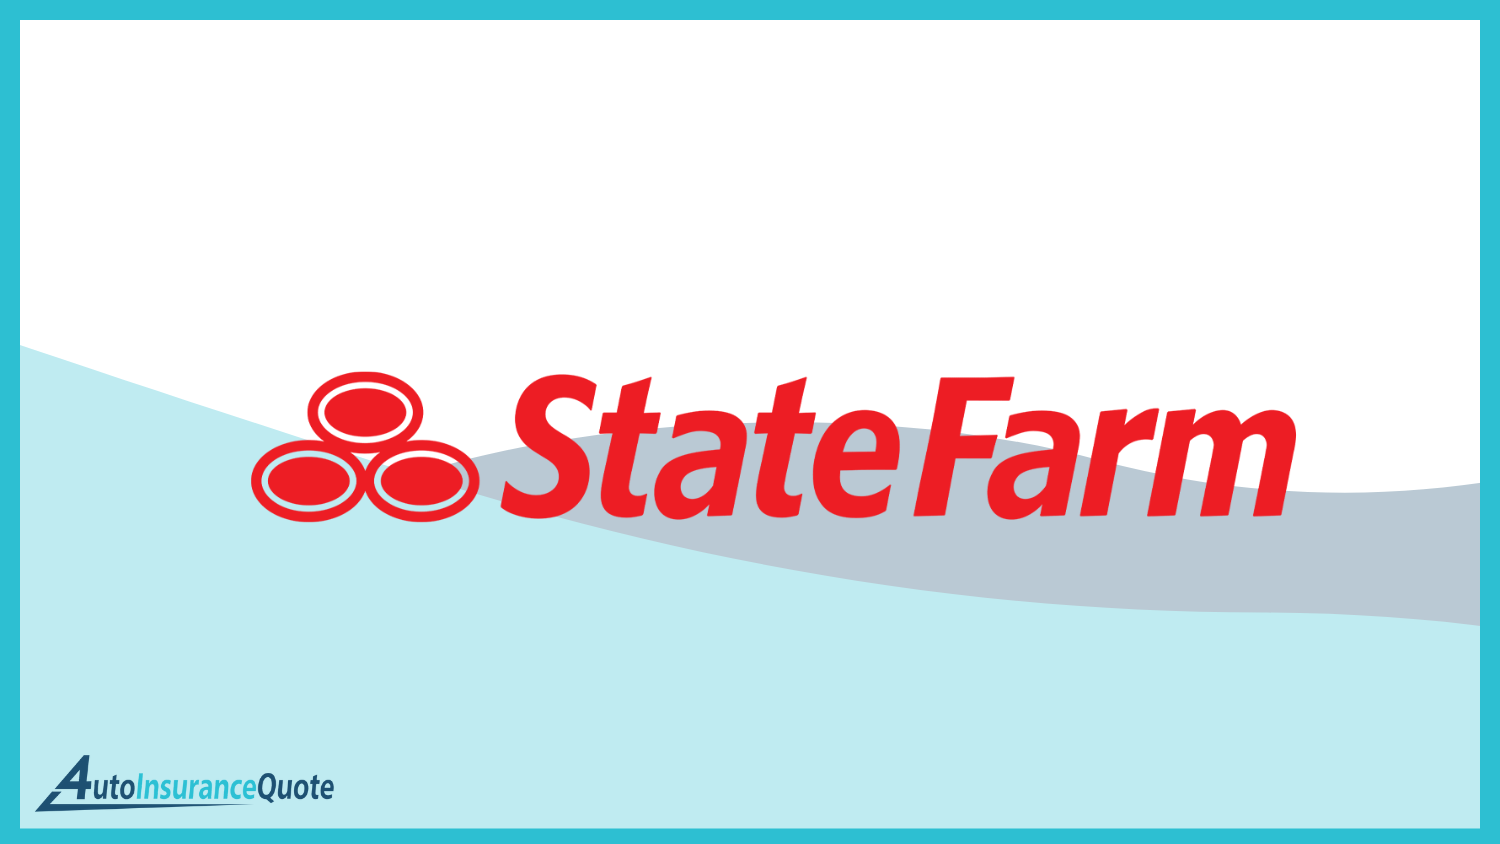 State Farm: 10 Best Auto Insurance Companies After a DUI